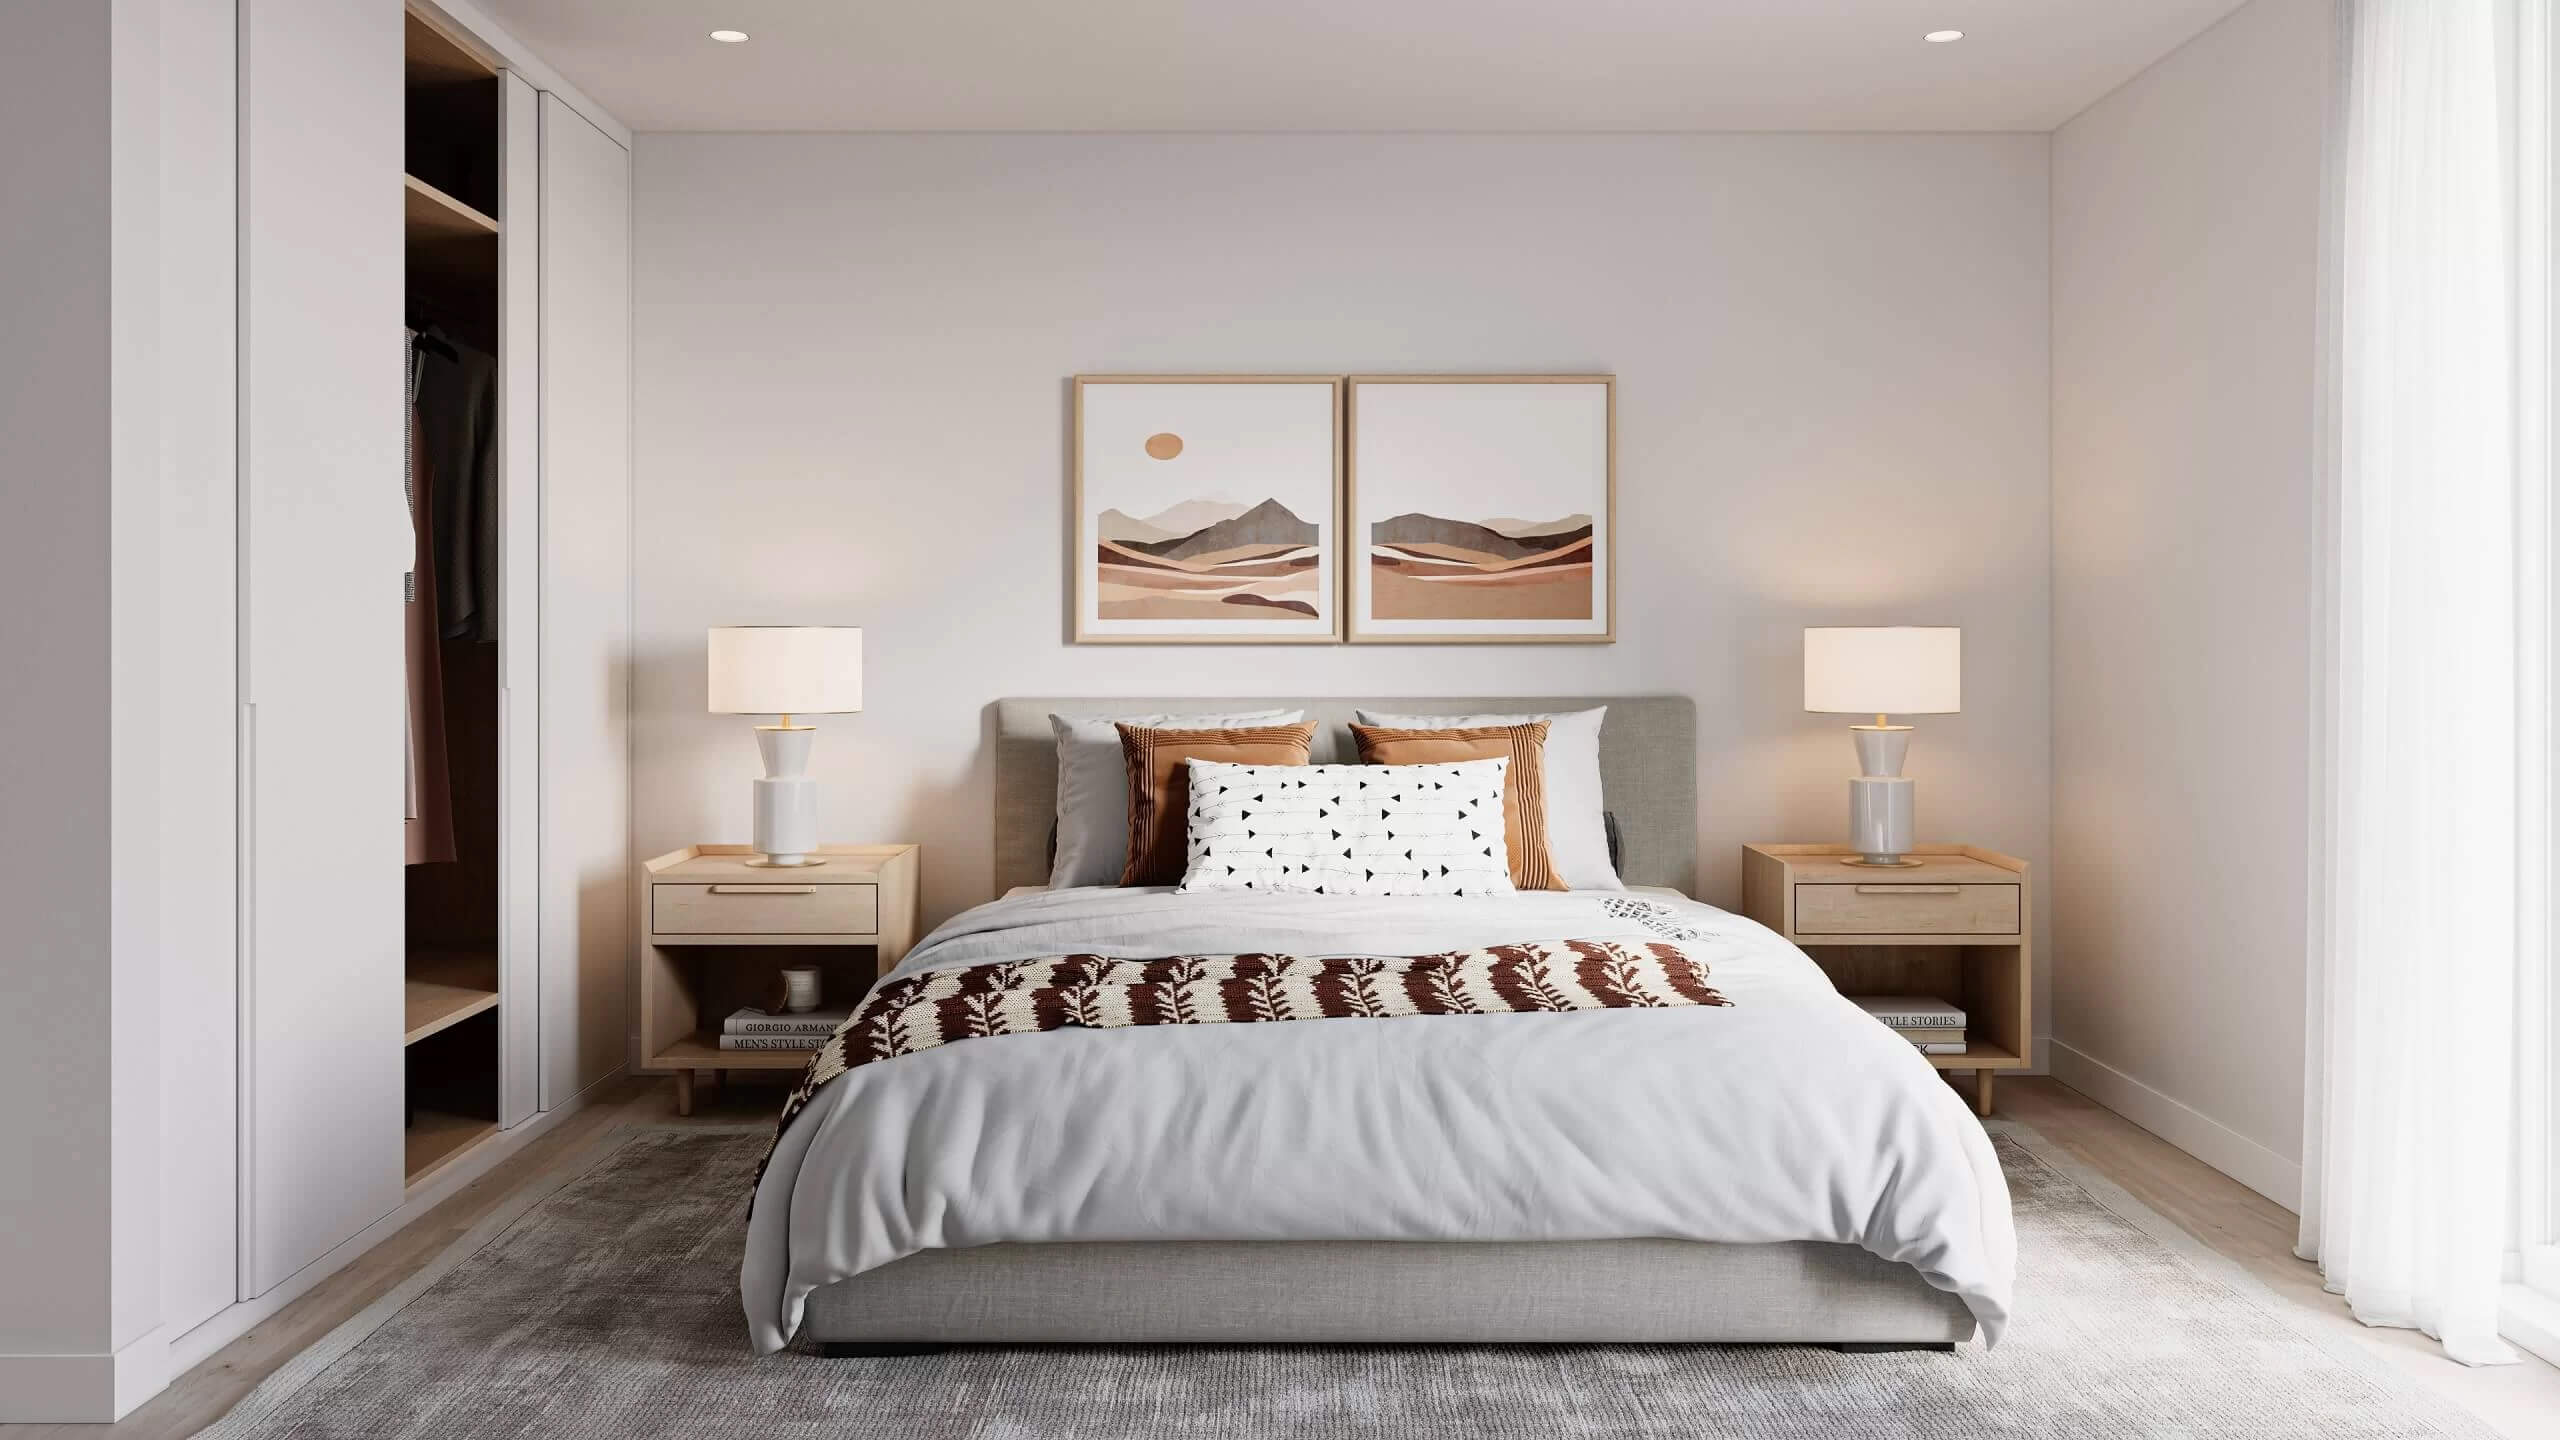 3D Rendering for a Soft-toned Bedroom